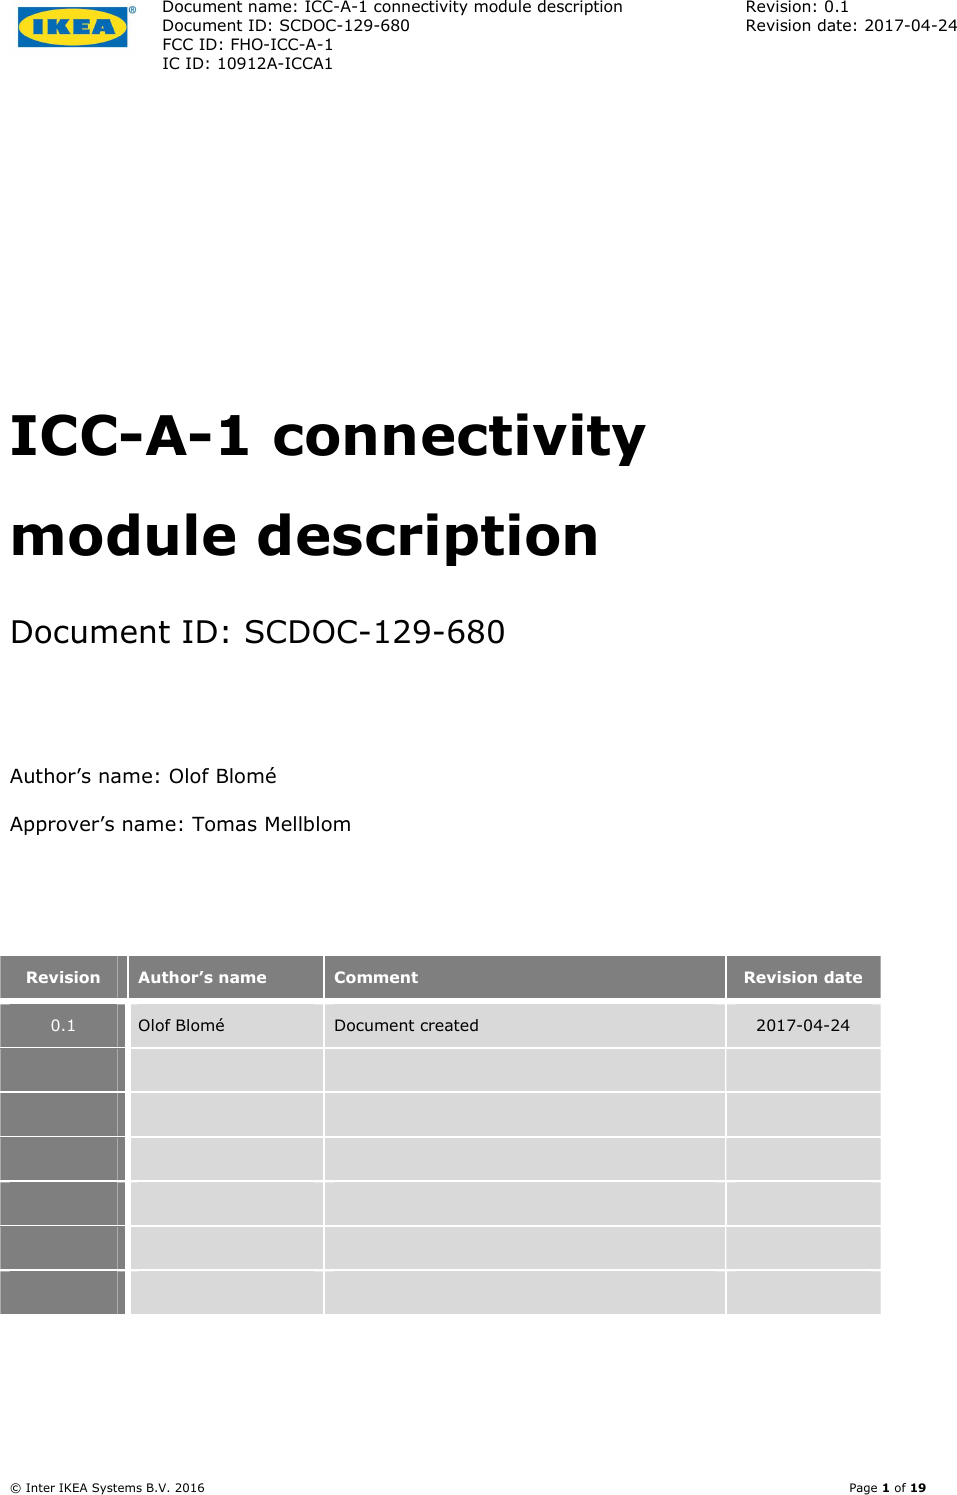 Document name: ICC-A-1 connectivity module description  Revision: 0.1 Document ID: SCDOC-129-680  Revision date: 2017-04-24  FCC ID: FHO-ICC-A-1     IC ID: 10912A-ICCA1       © Inter IKEA Systems B.V. 2016    Page 1 of 19     ICC-A-1 connectivity module description Document ID: SCDOC-129-680  Author’s name: Olof Blomé Approver’s name: Tomas Mellblom   Revision  Author’s name  Comment  Revision date 0.1 Olof Blomé  Document created  2017-04-24                                     